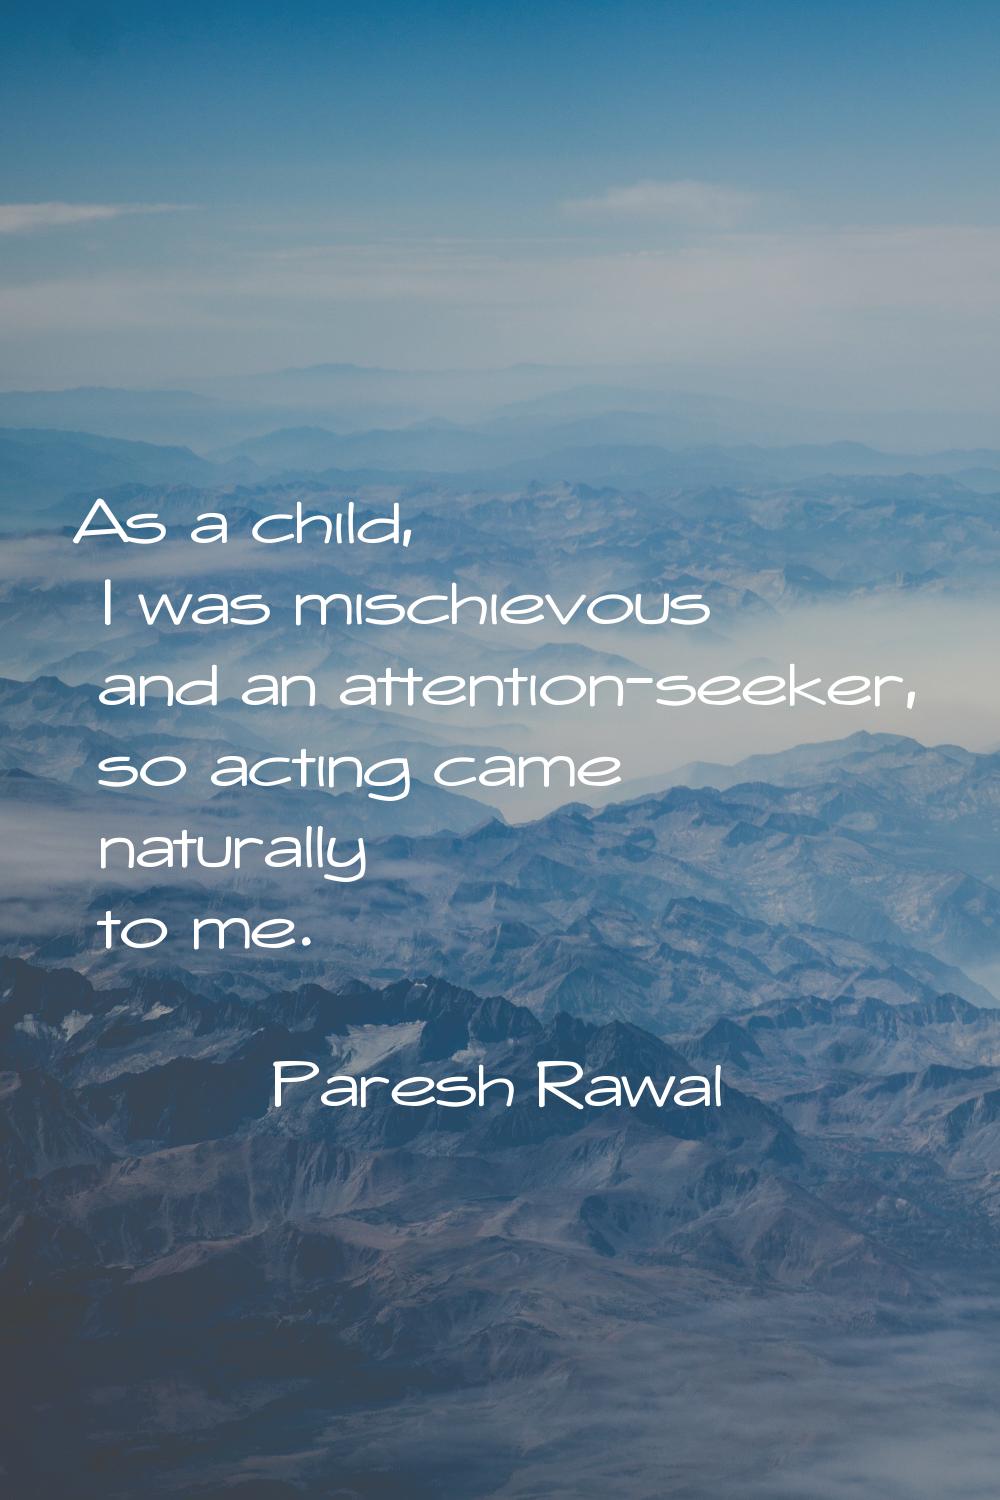 As a child, I was mischievous and an attention-seeker, so acting came naturally to me.